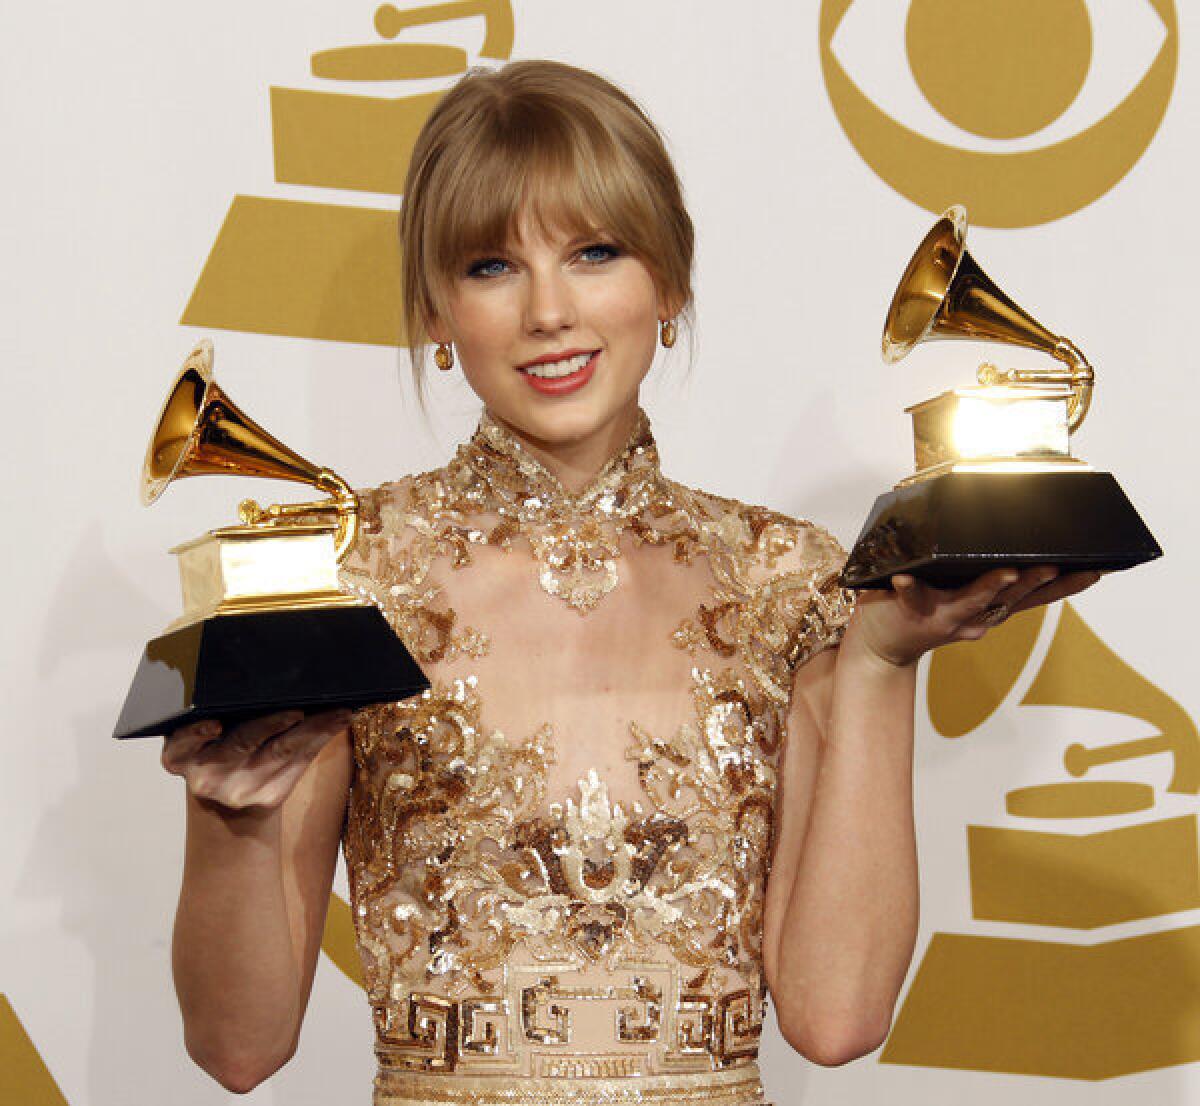 Taylor Swift at the 2012 Grammy Awards, where she won for best country solo performance and best country song.